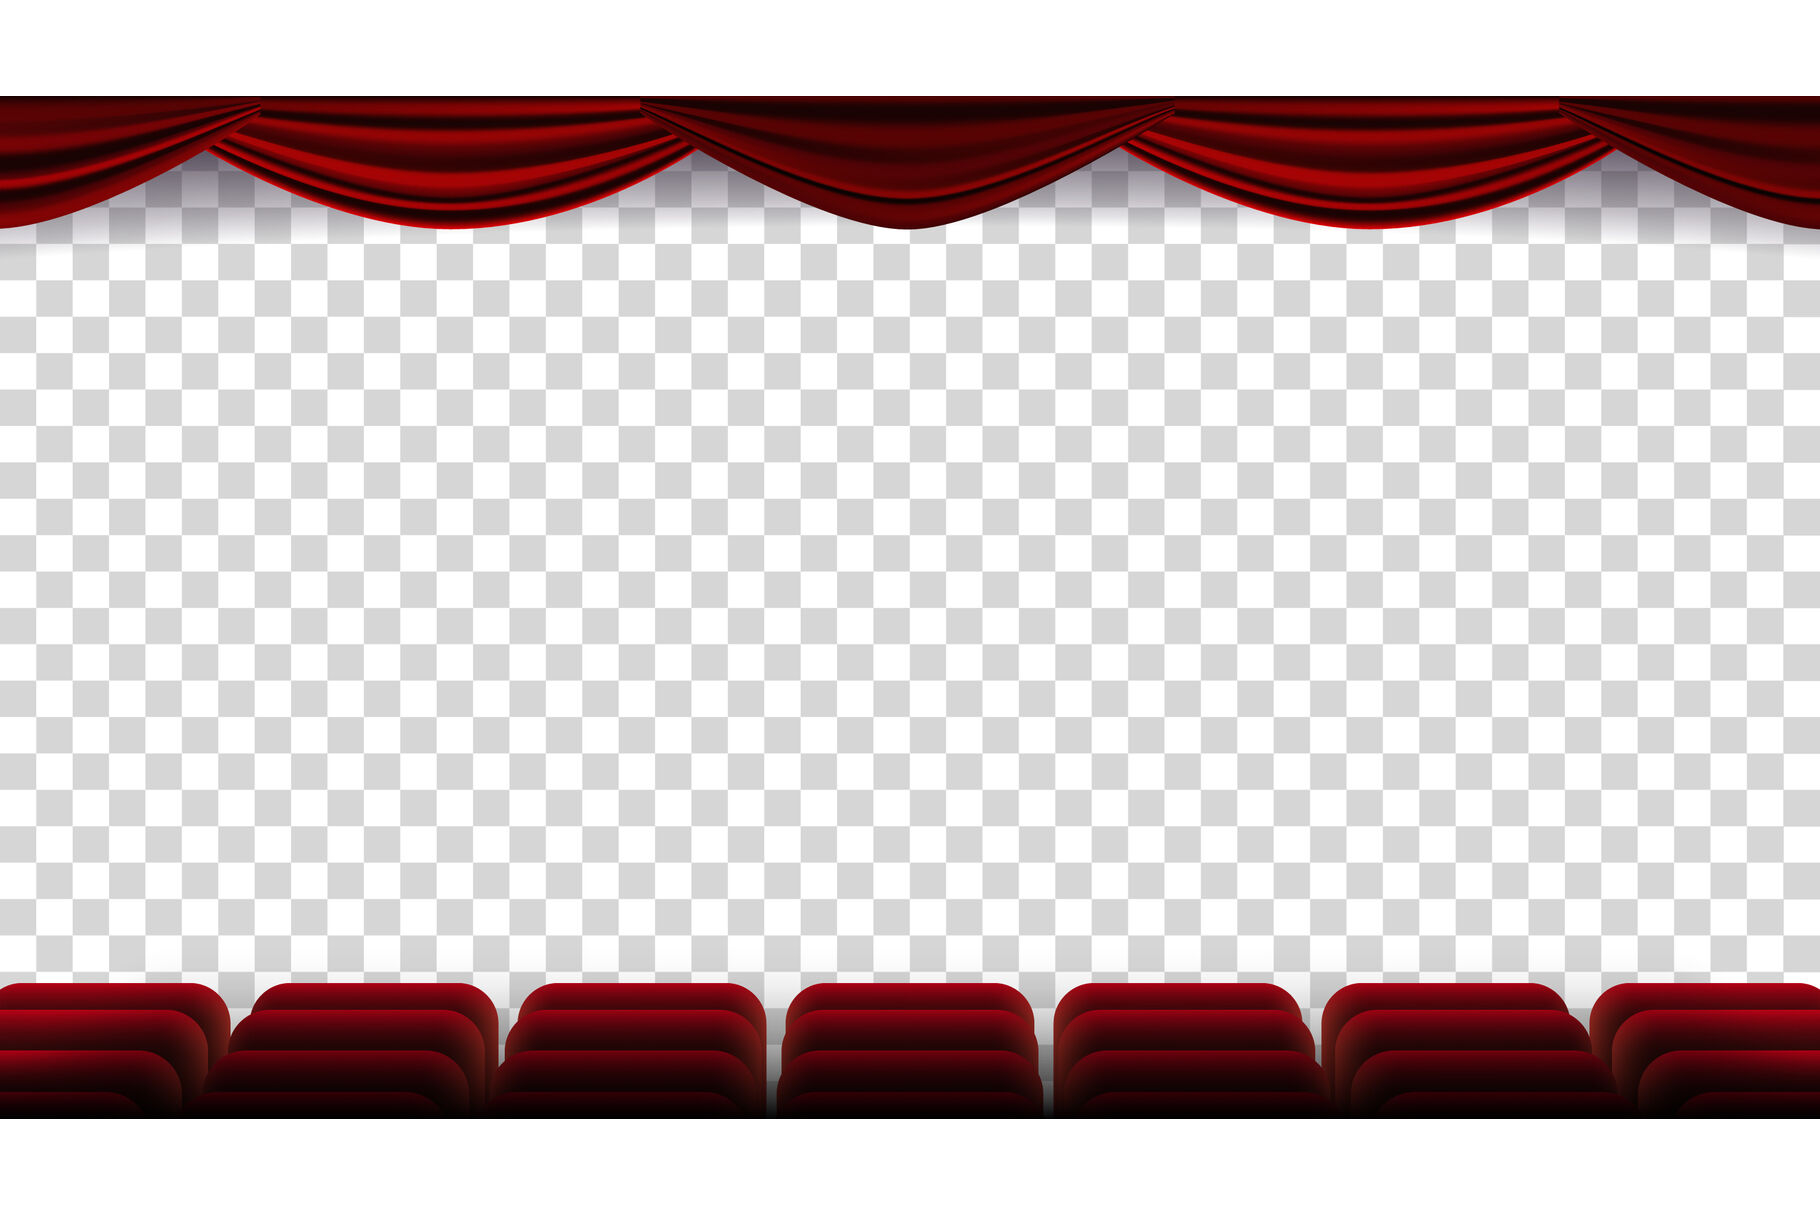 Cinema Chairs Vector Film Movie Theater Auditorium With Red Seat Row Of Chairs Blank Screen Isolated On Transparent Background Illustration By Pikepicture Thehungryjpeg Com